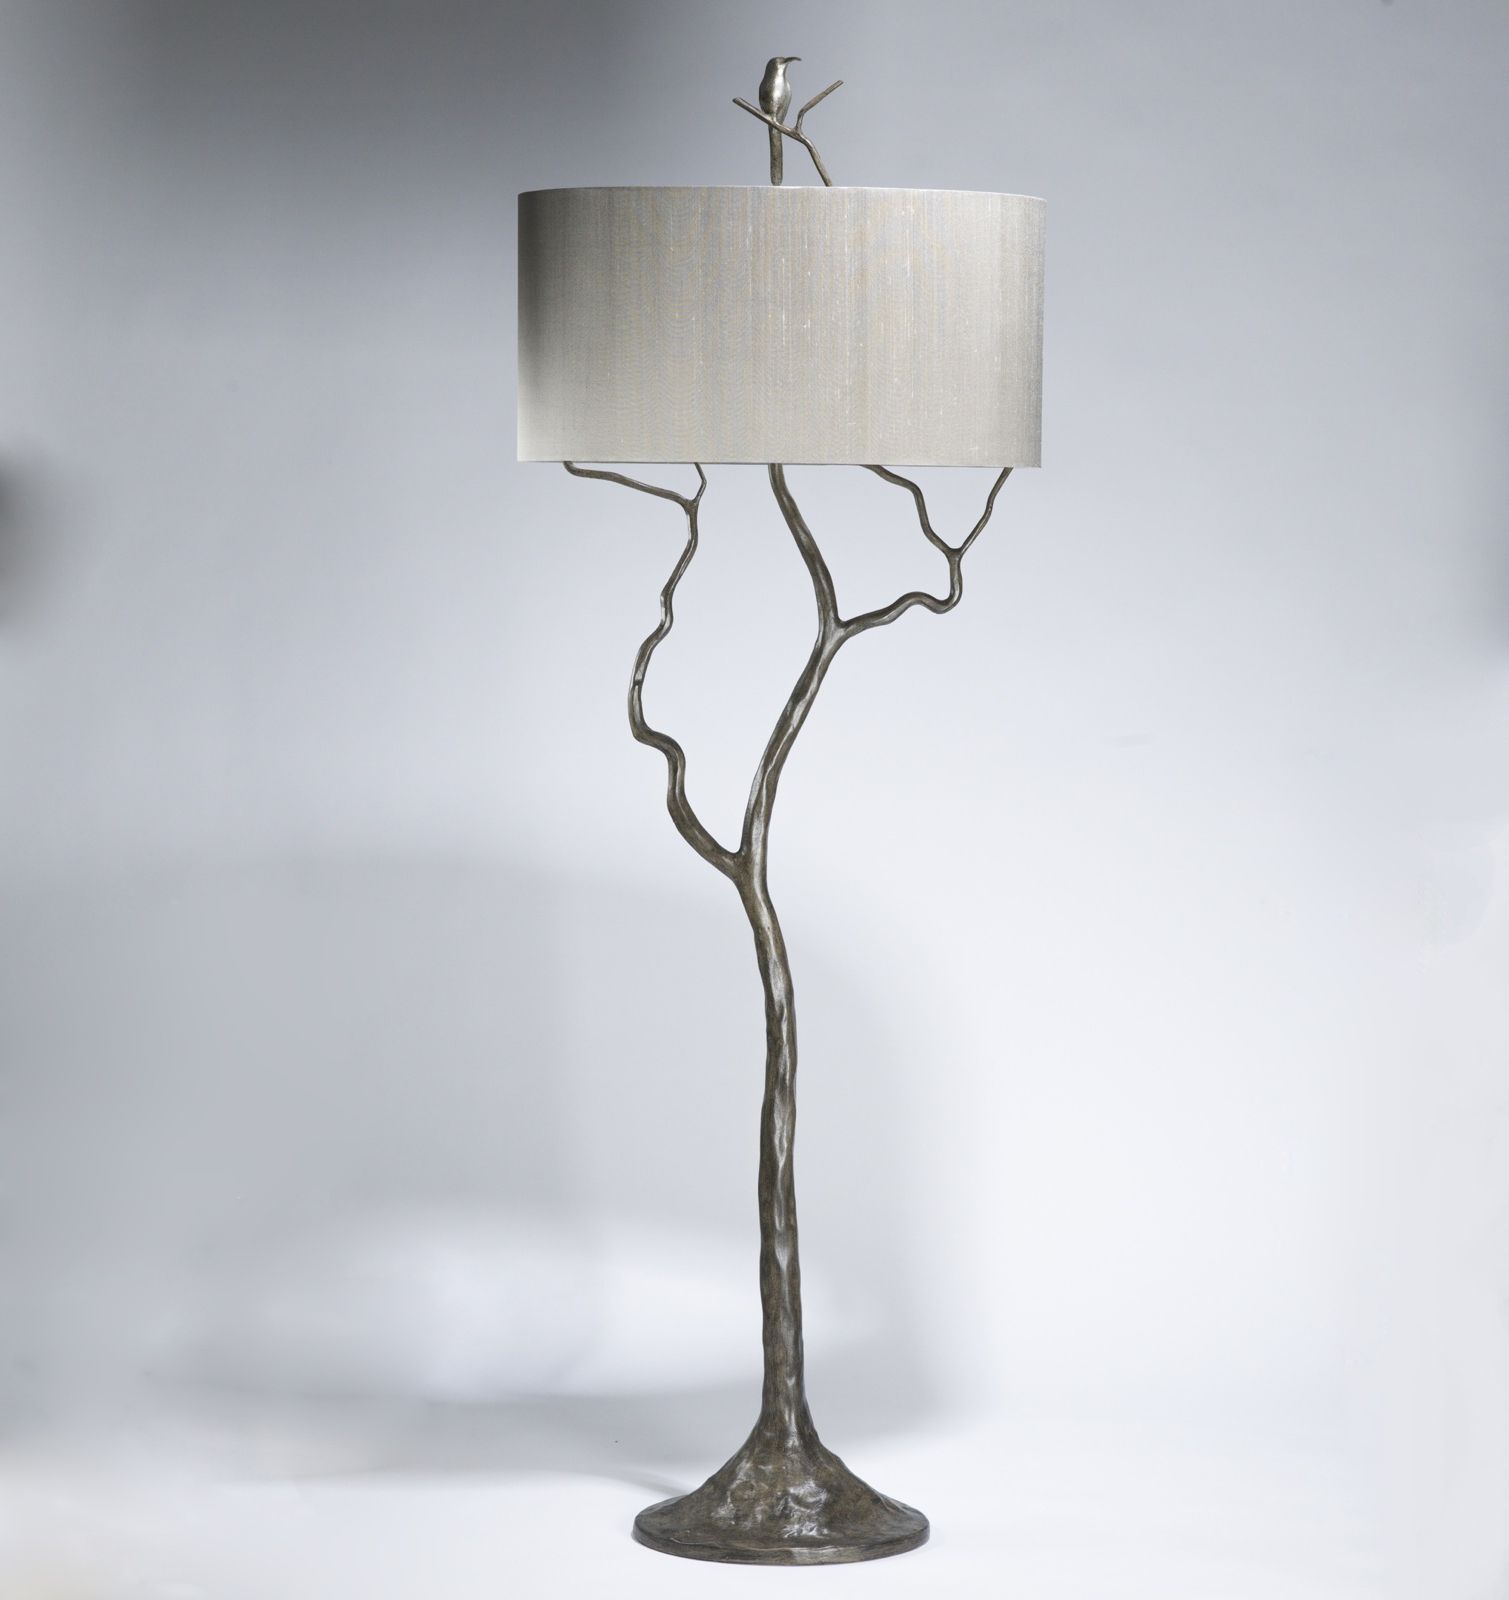 Tall Tree & Humming Bird Floor Lamp In Grey Painted Pewter, Distressed  Silver Leaf Finish (t3598) – Tyson – Decorative Lighting And Bespoke  Furniture Within Silver Floor Lamps (View 14 of 20)